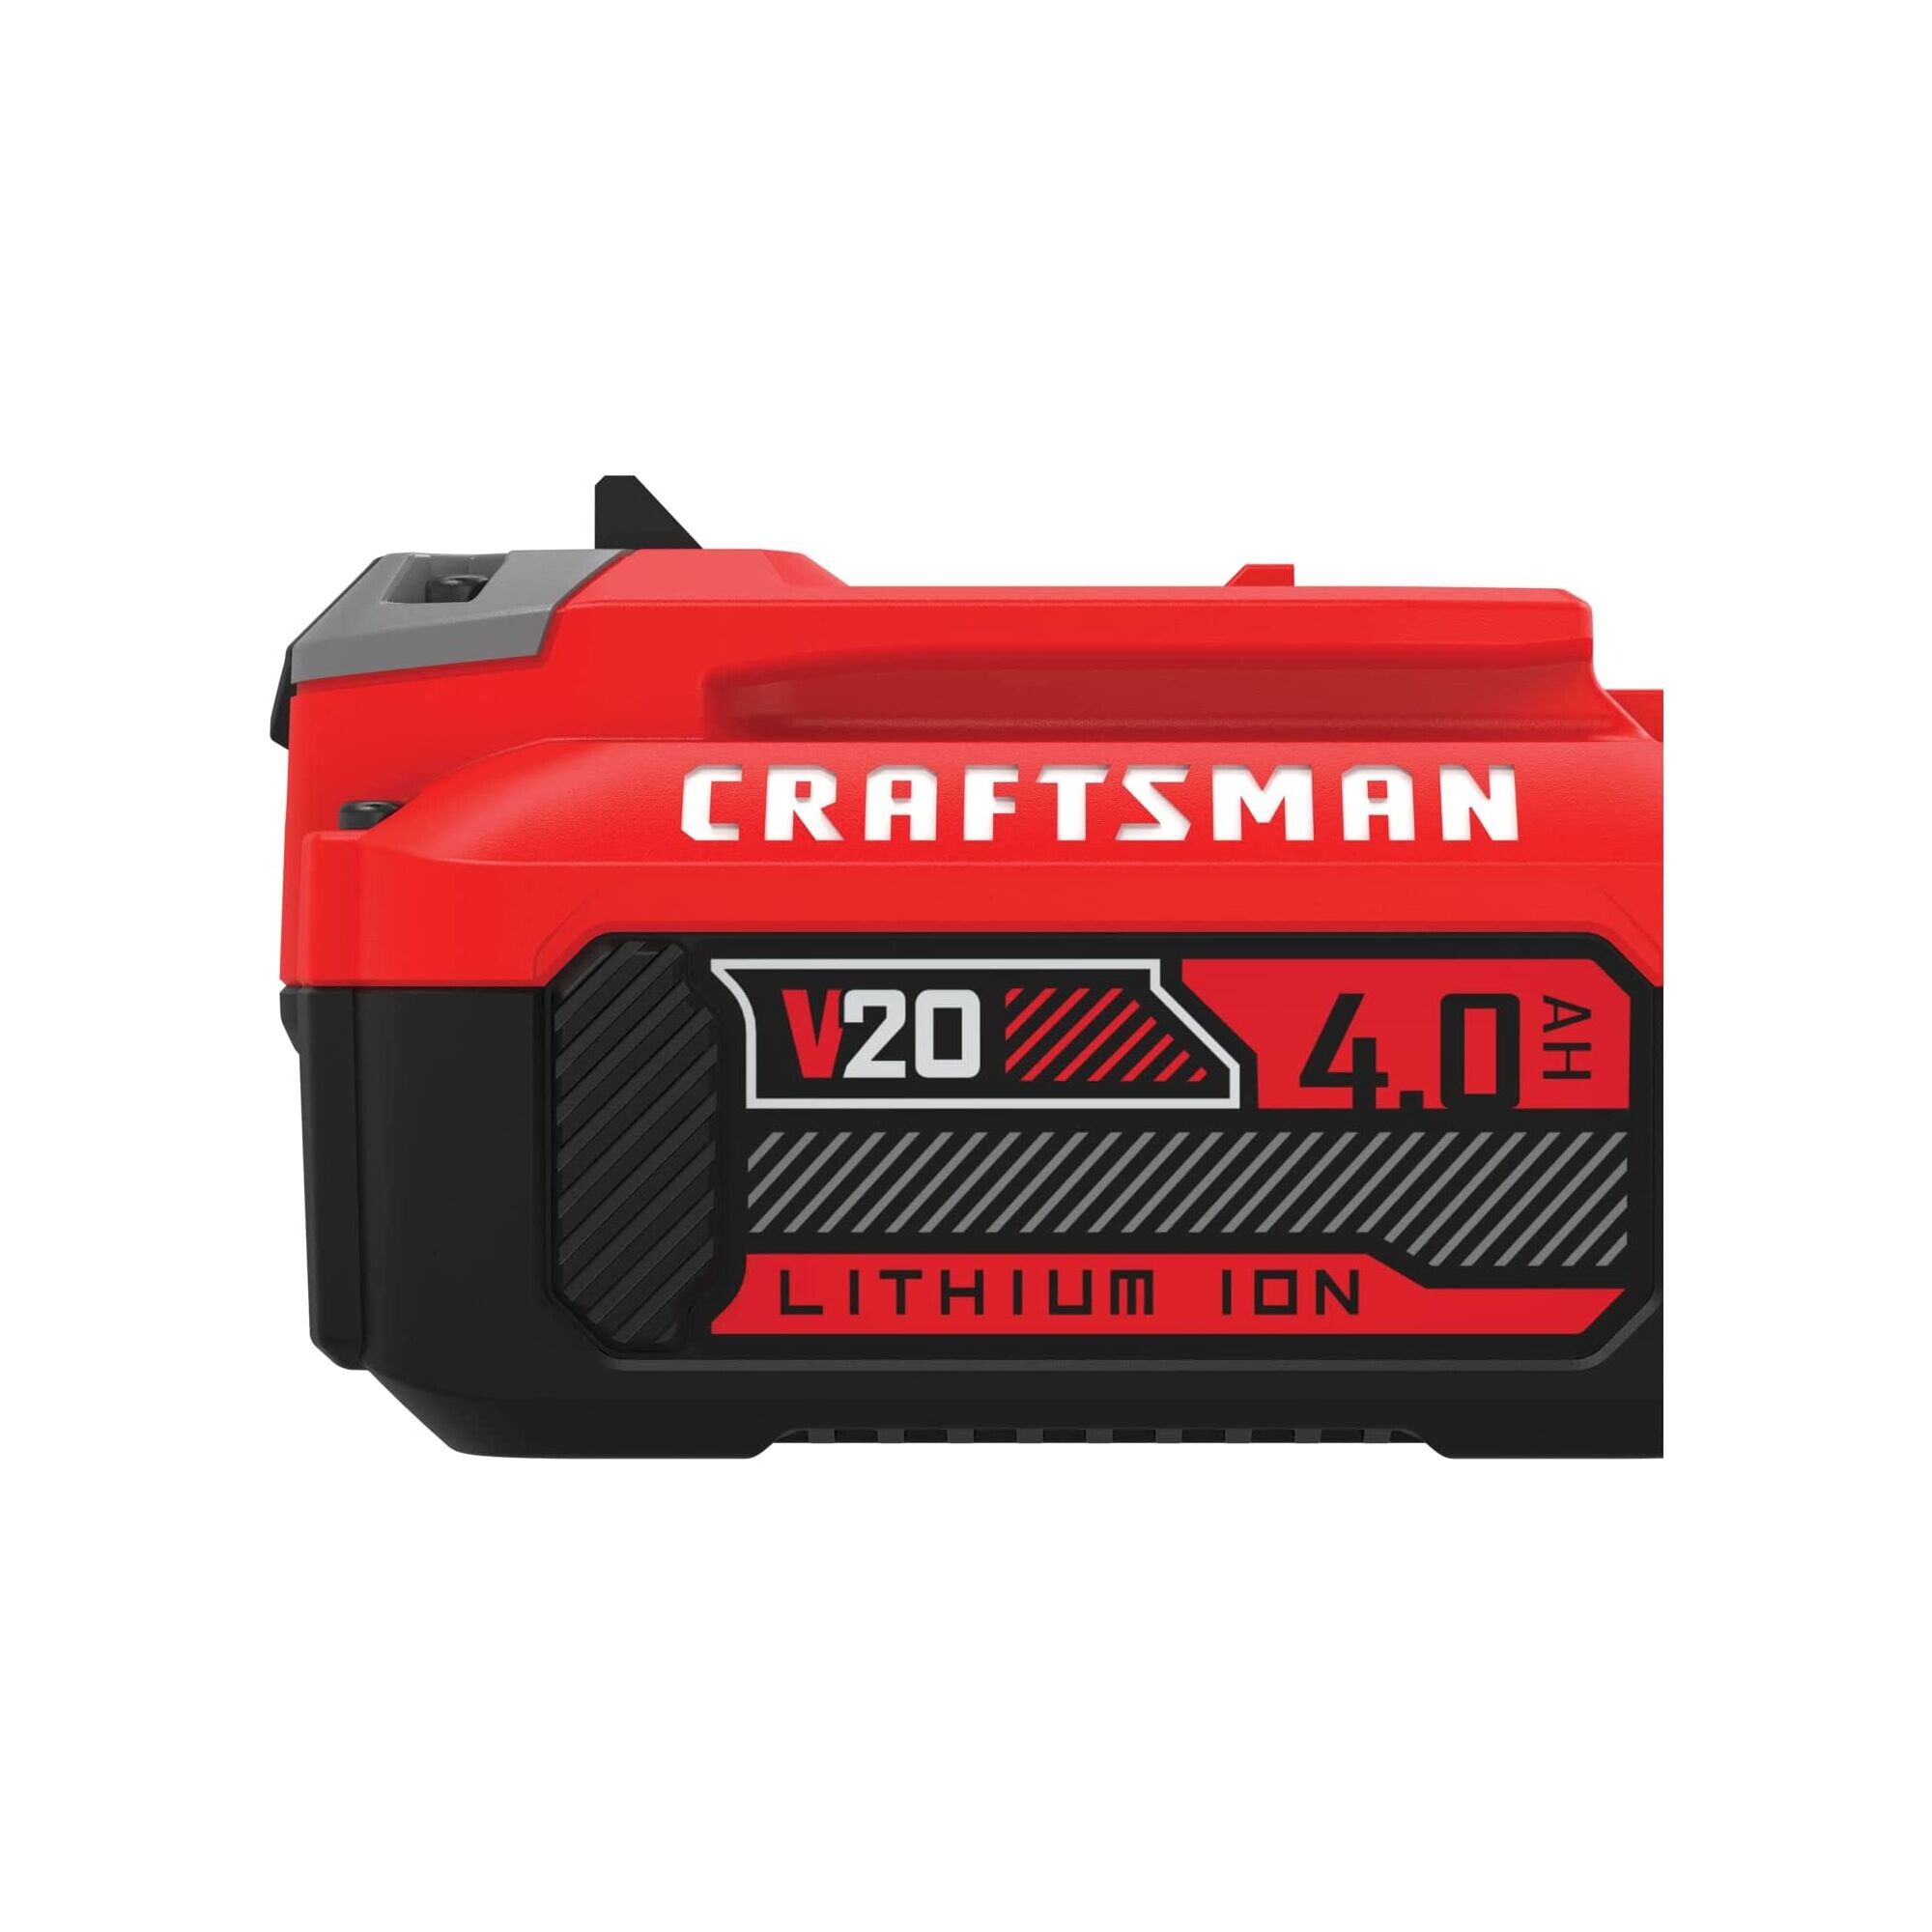 View of CRAFTSMAN Batteries & Chargers packaging